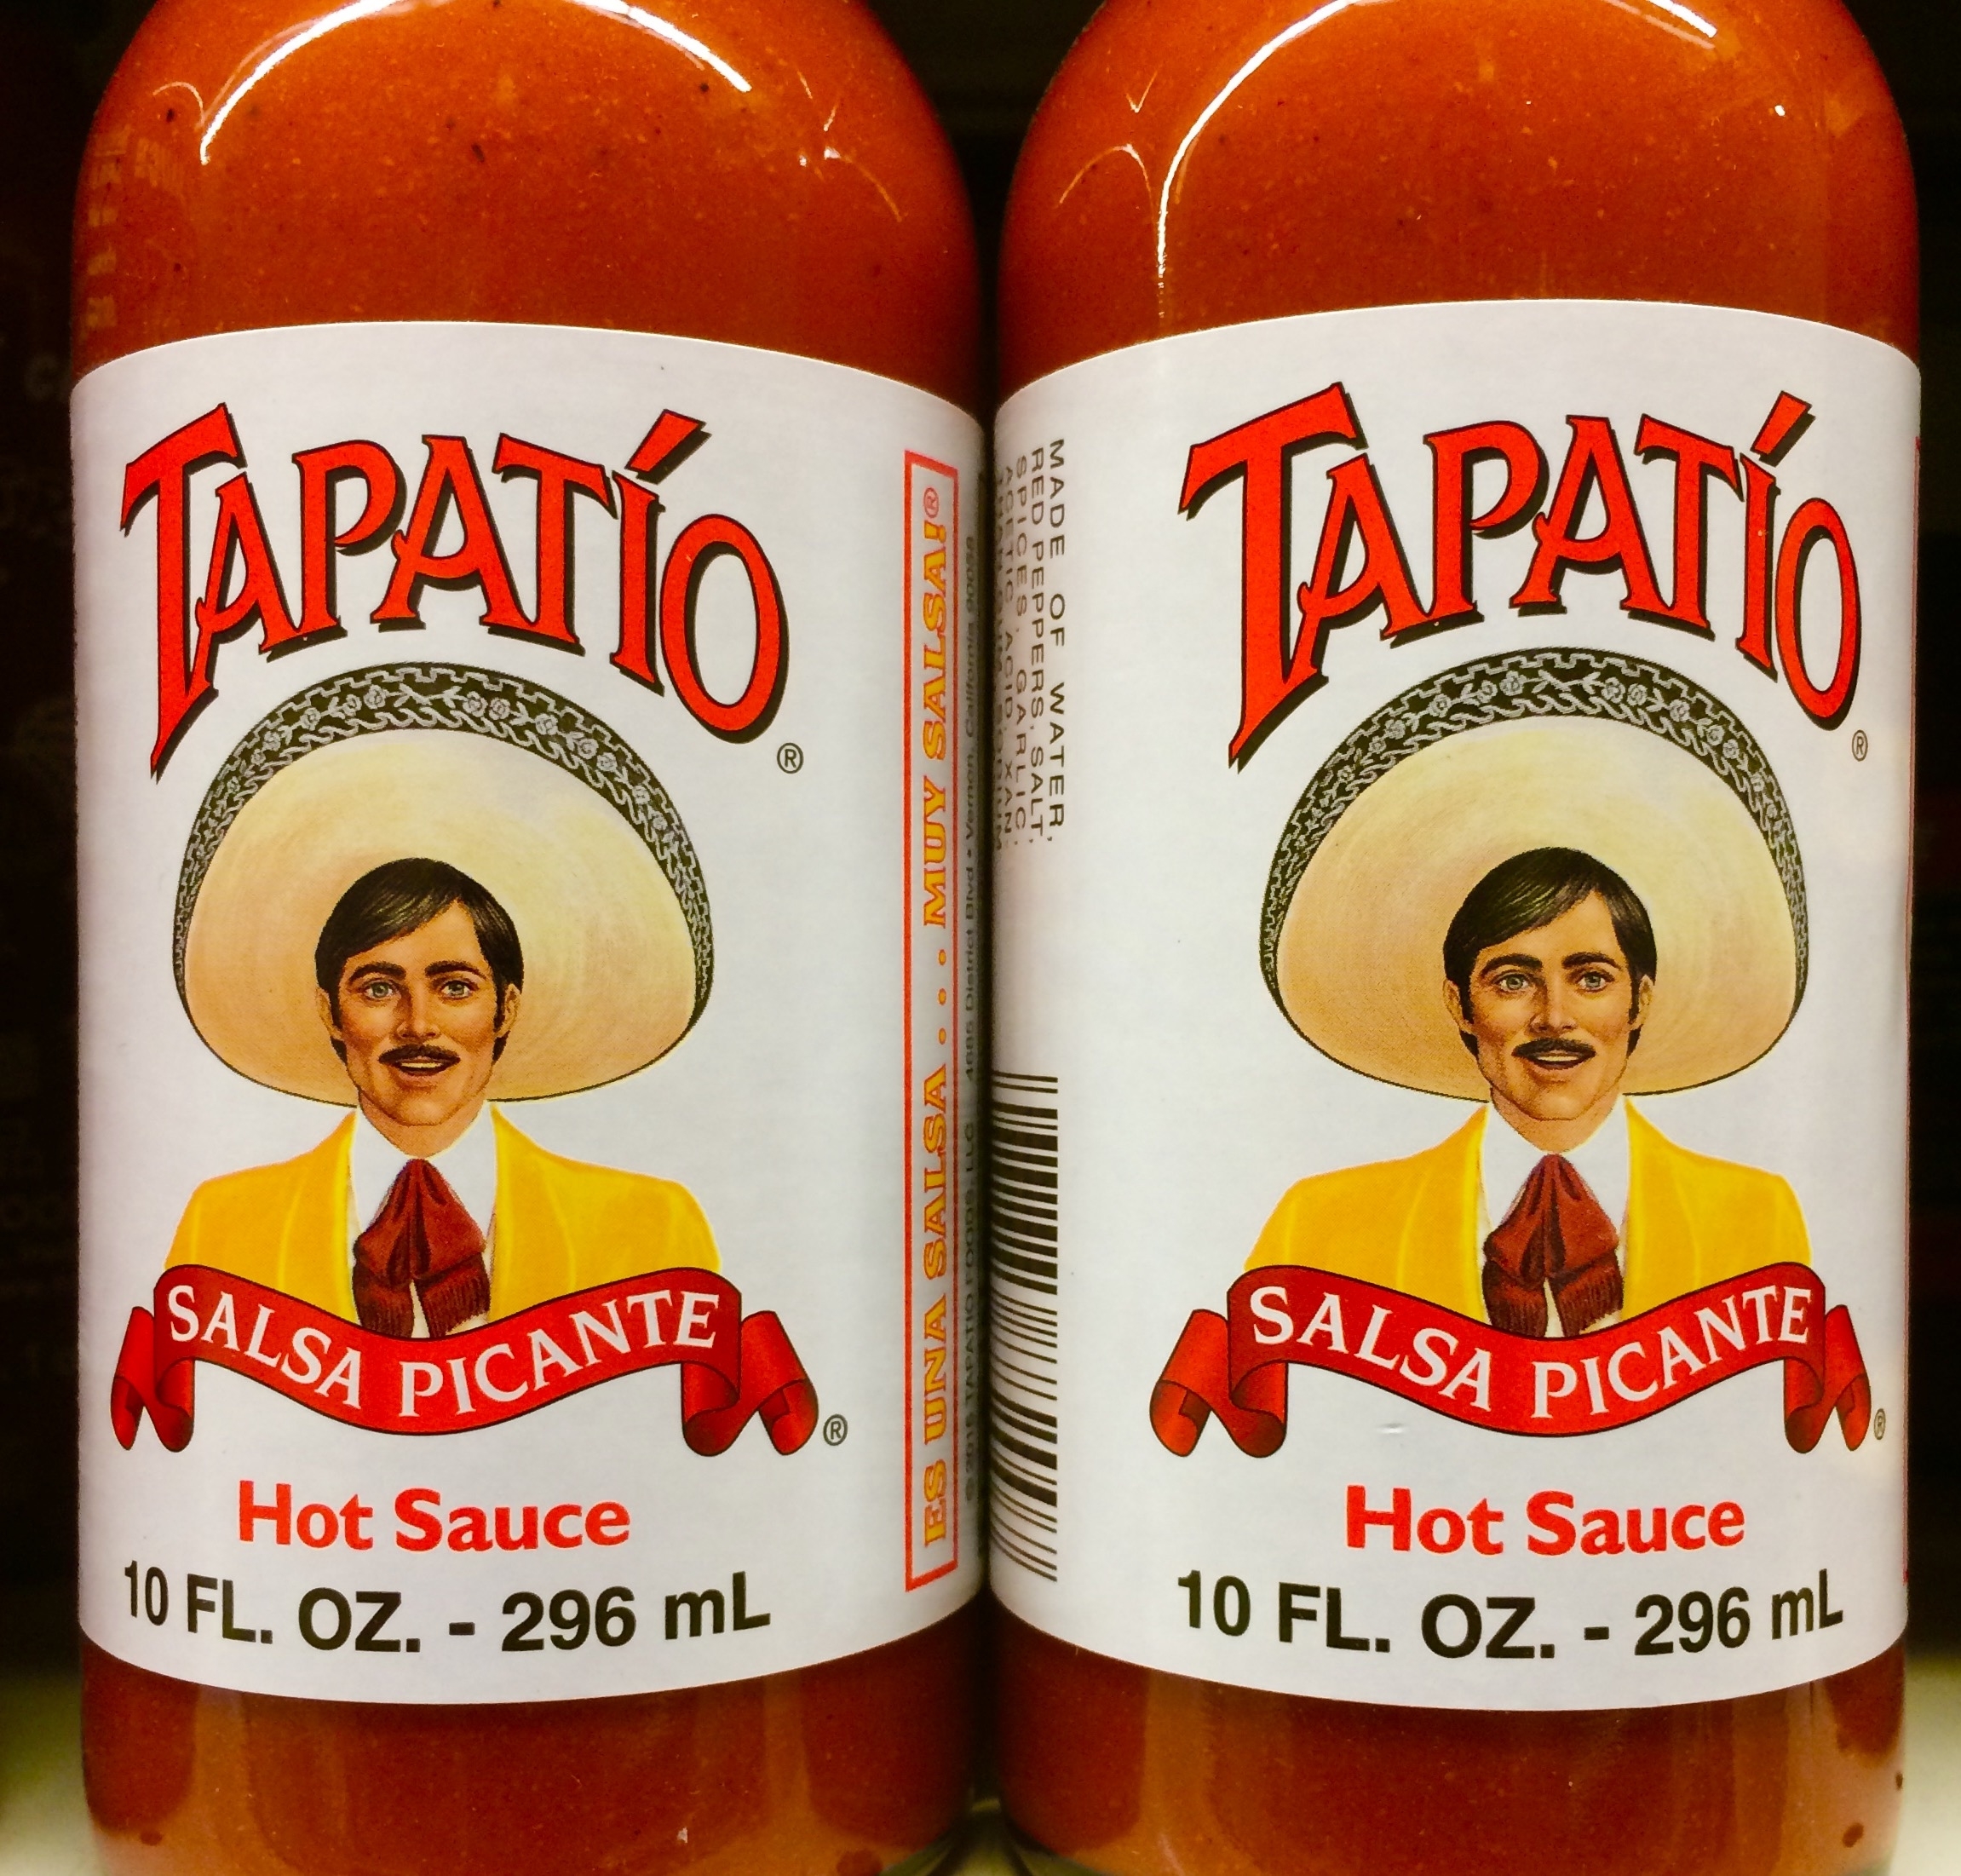 Tapatio, popular Mexican hot sauce in bottles